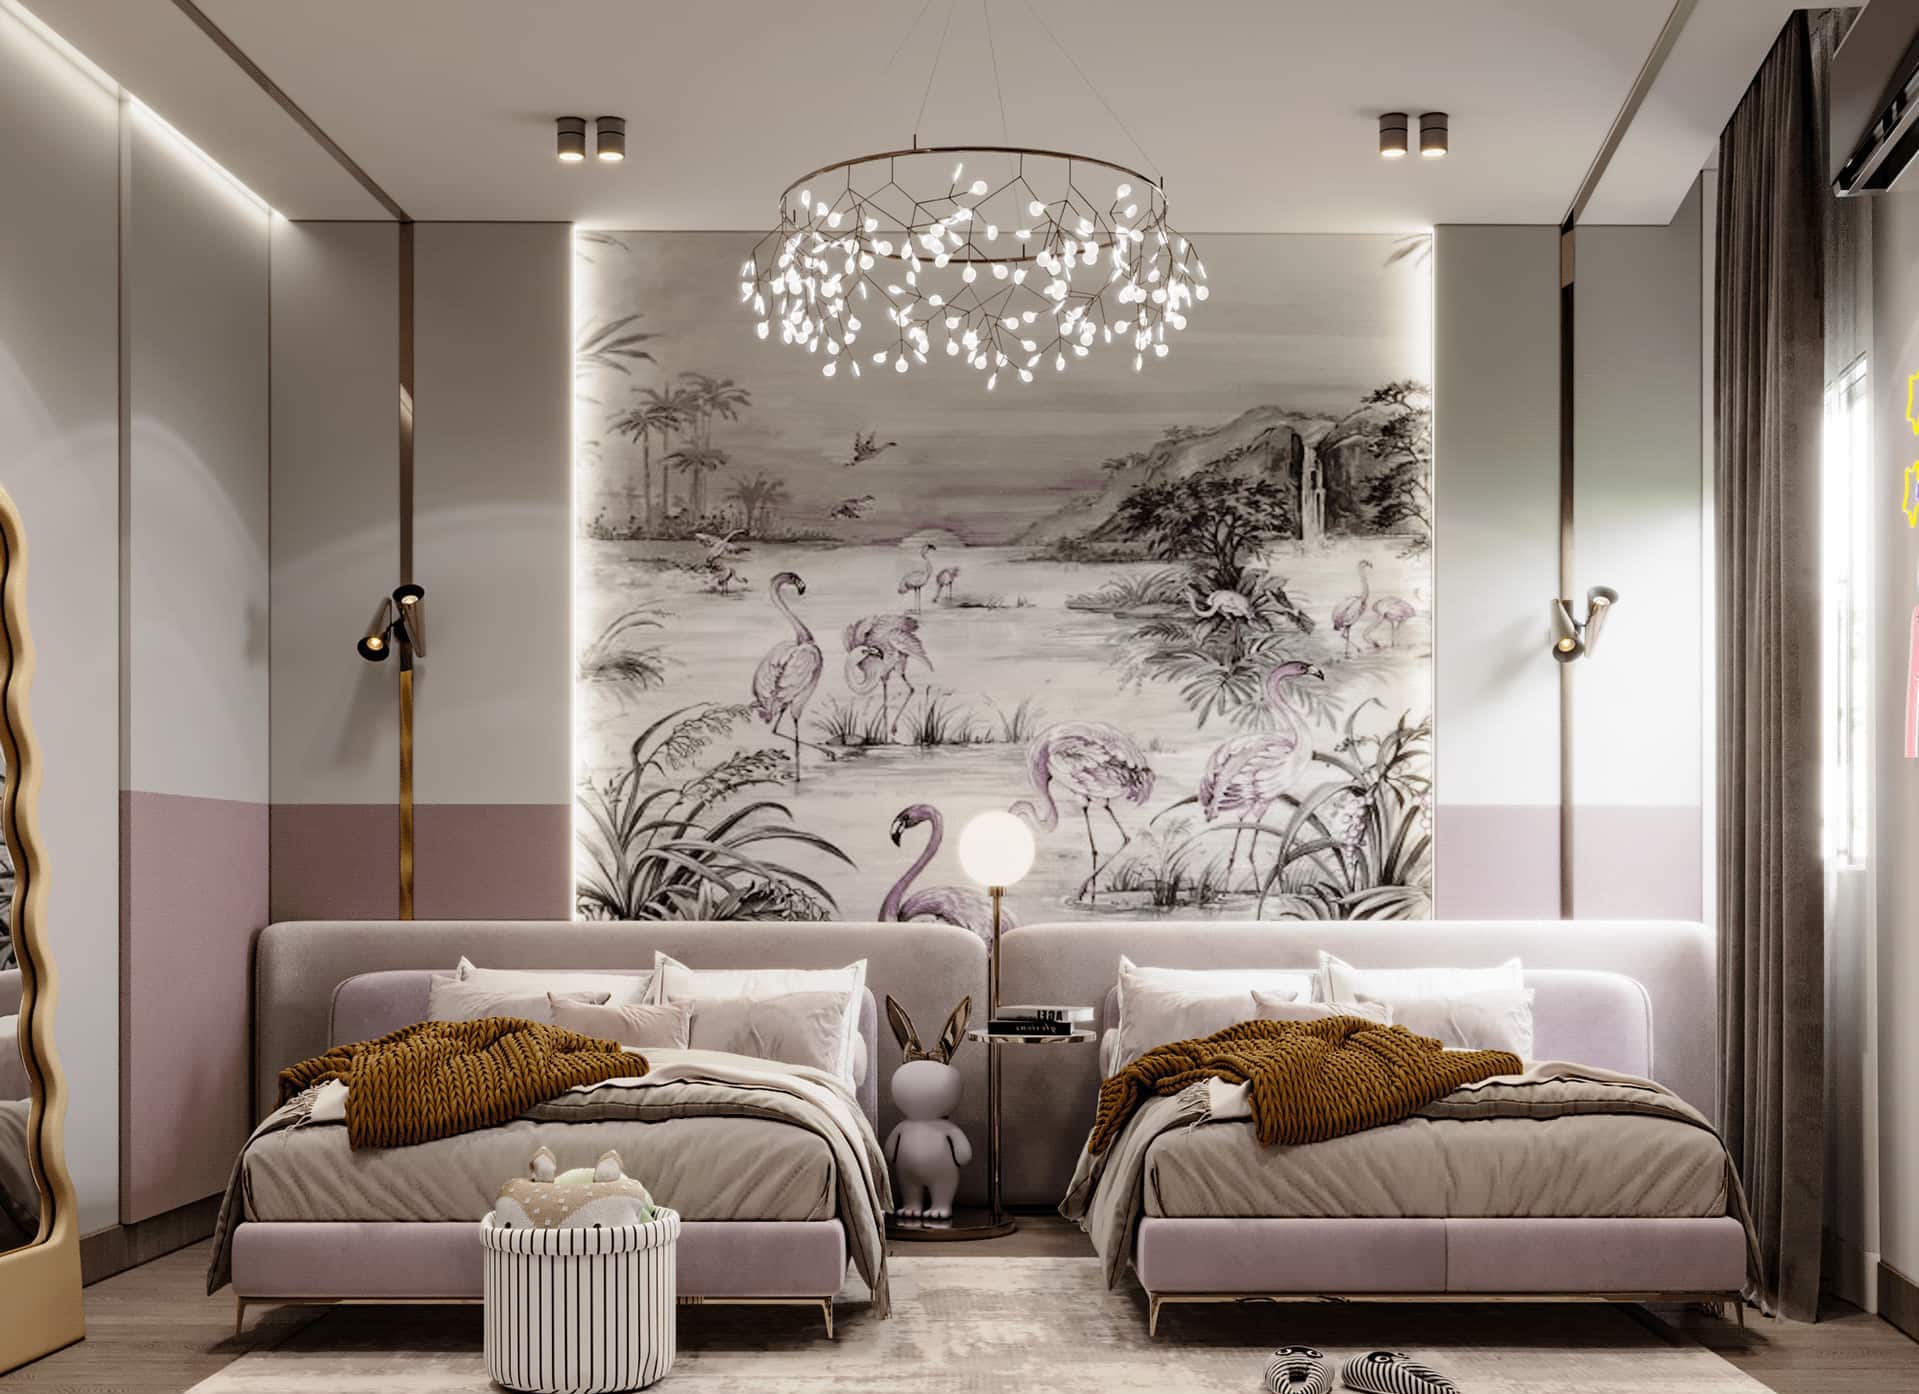 classic room decor with violet and beige shades for your space, chandelier, rug, wallpaper